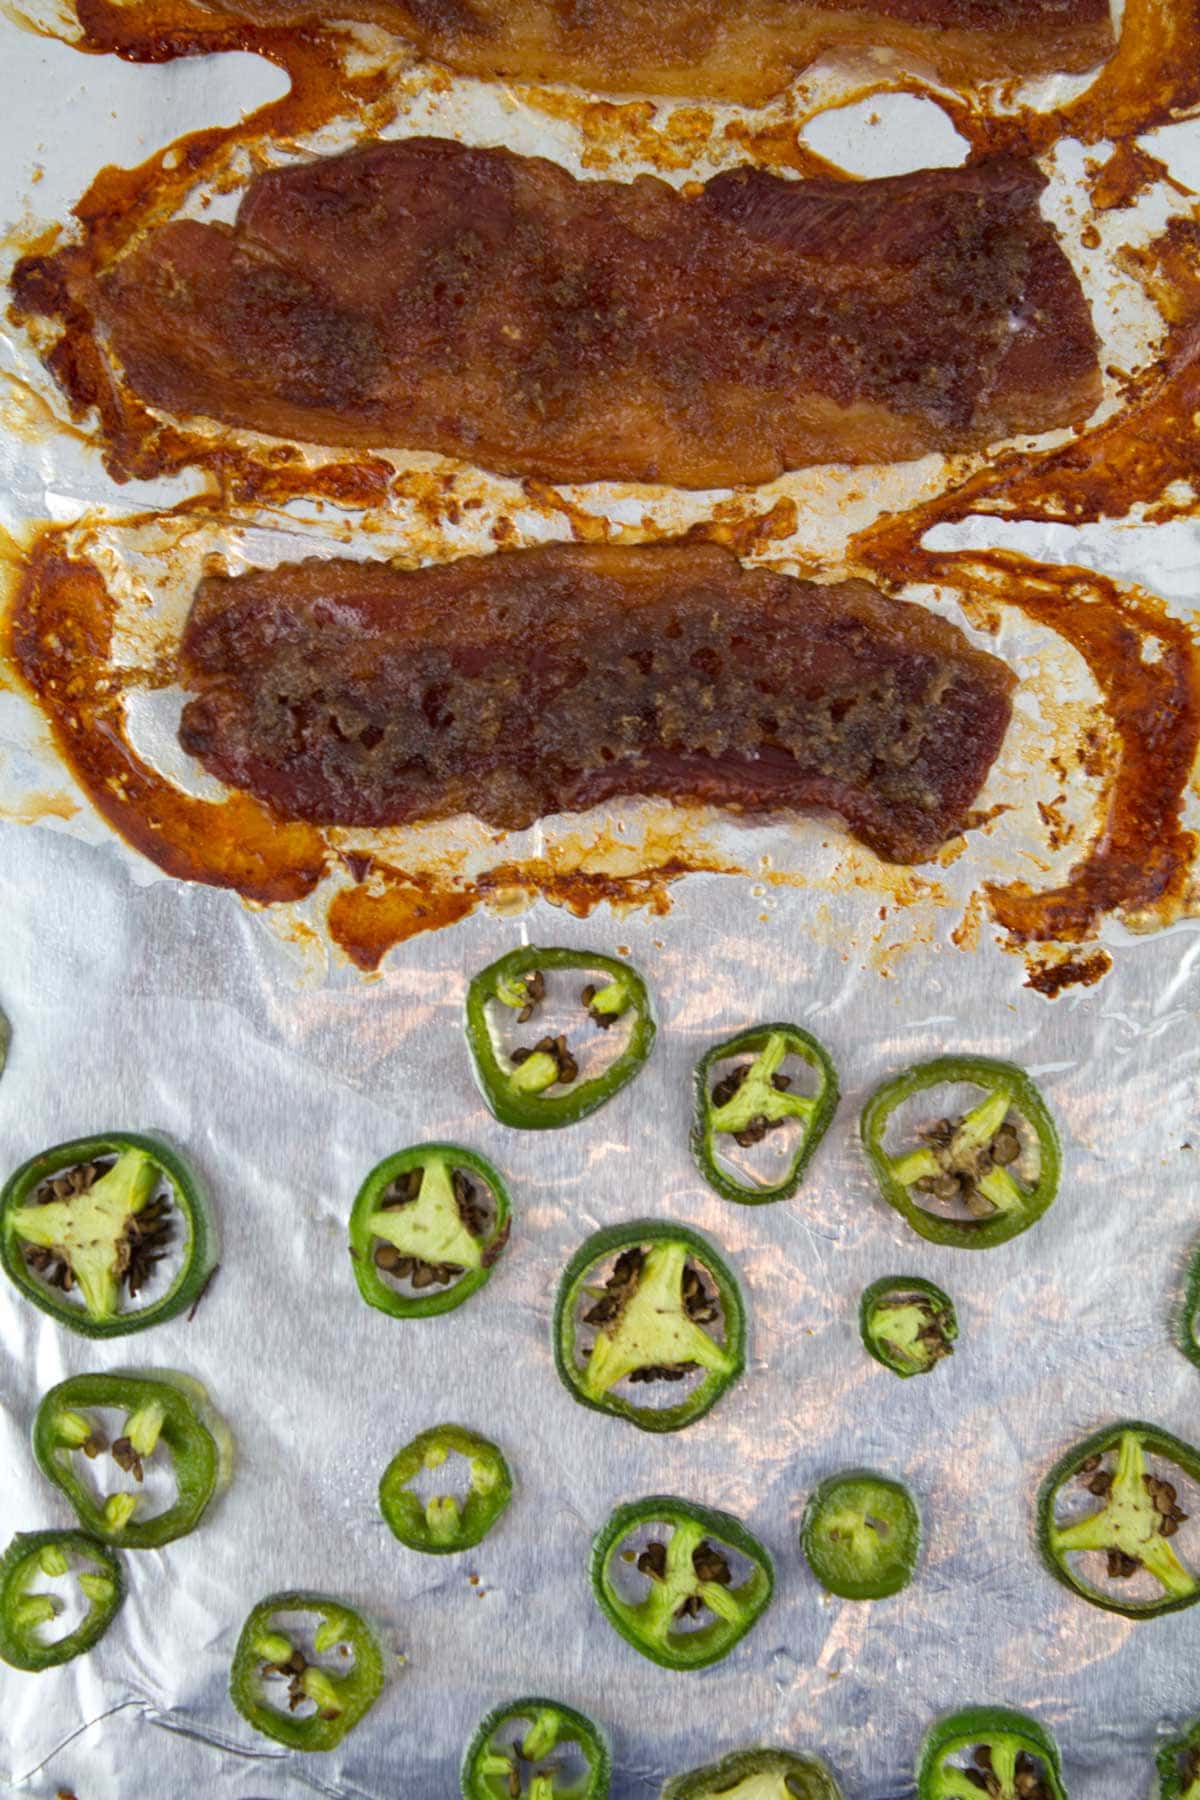 Baking sheet with roasted jalapeno slices and pieces of candied bacon just out of the oven.